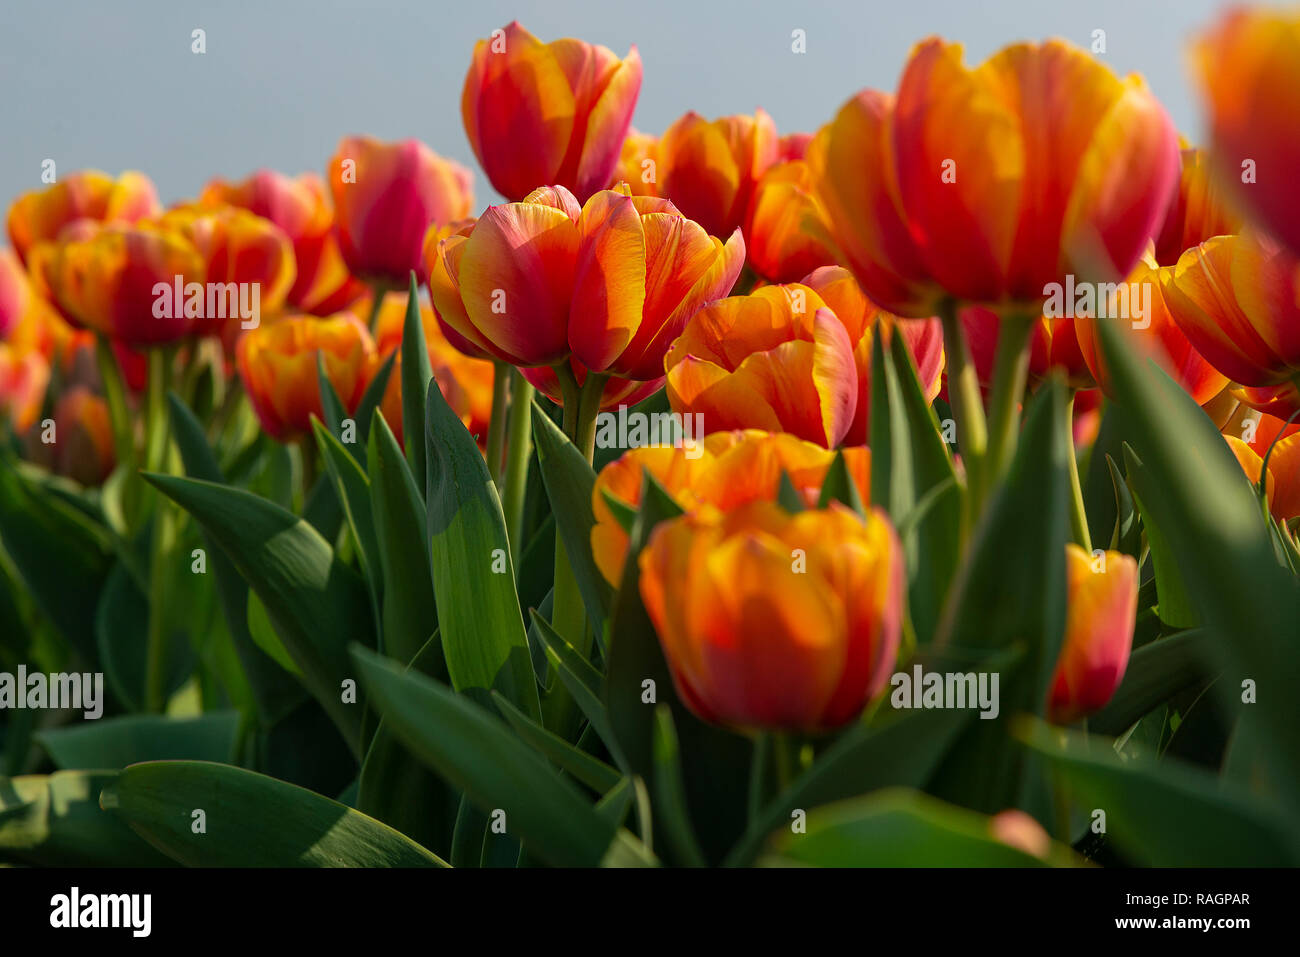 The beautiful  orange tulip 'Marit' growing in a field of tulips in South Holland, Netherlands Stock Photo